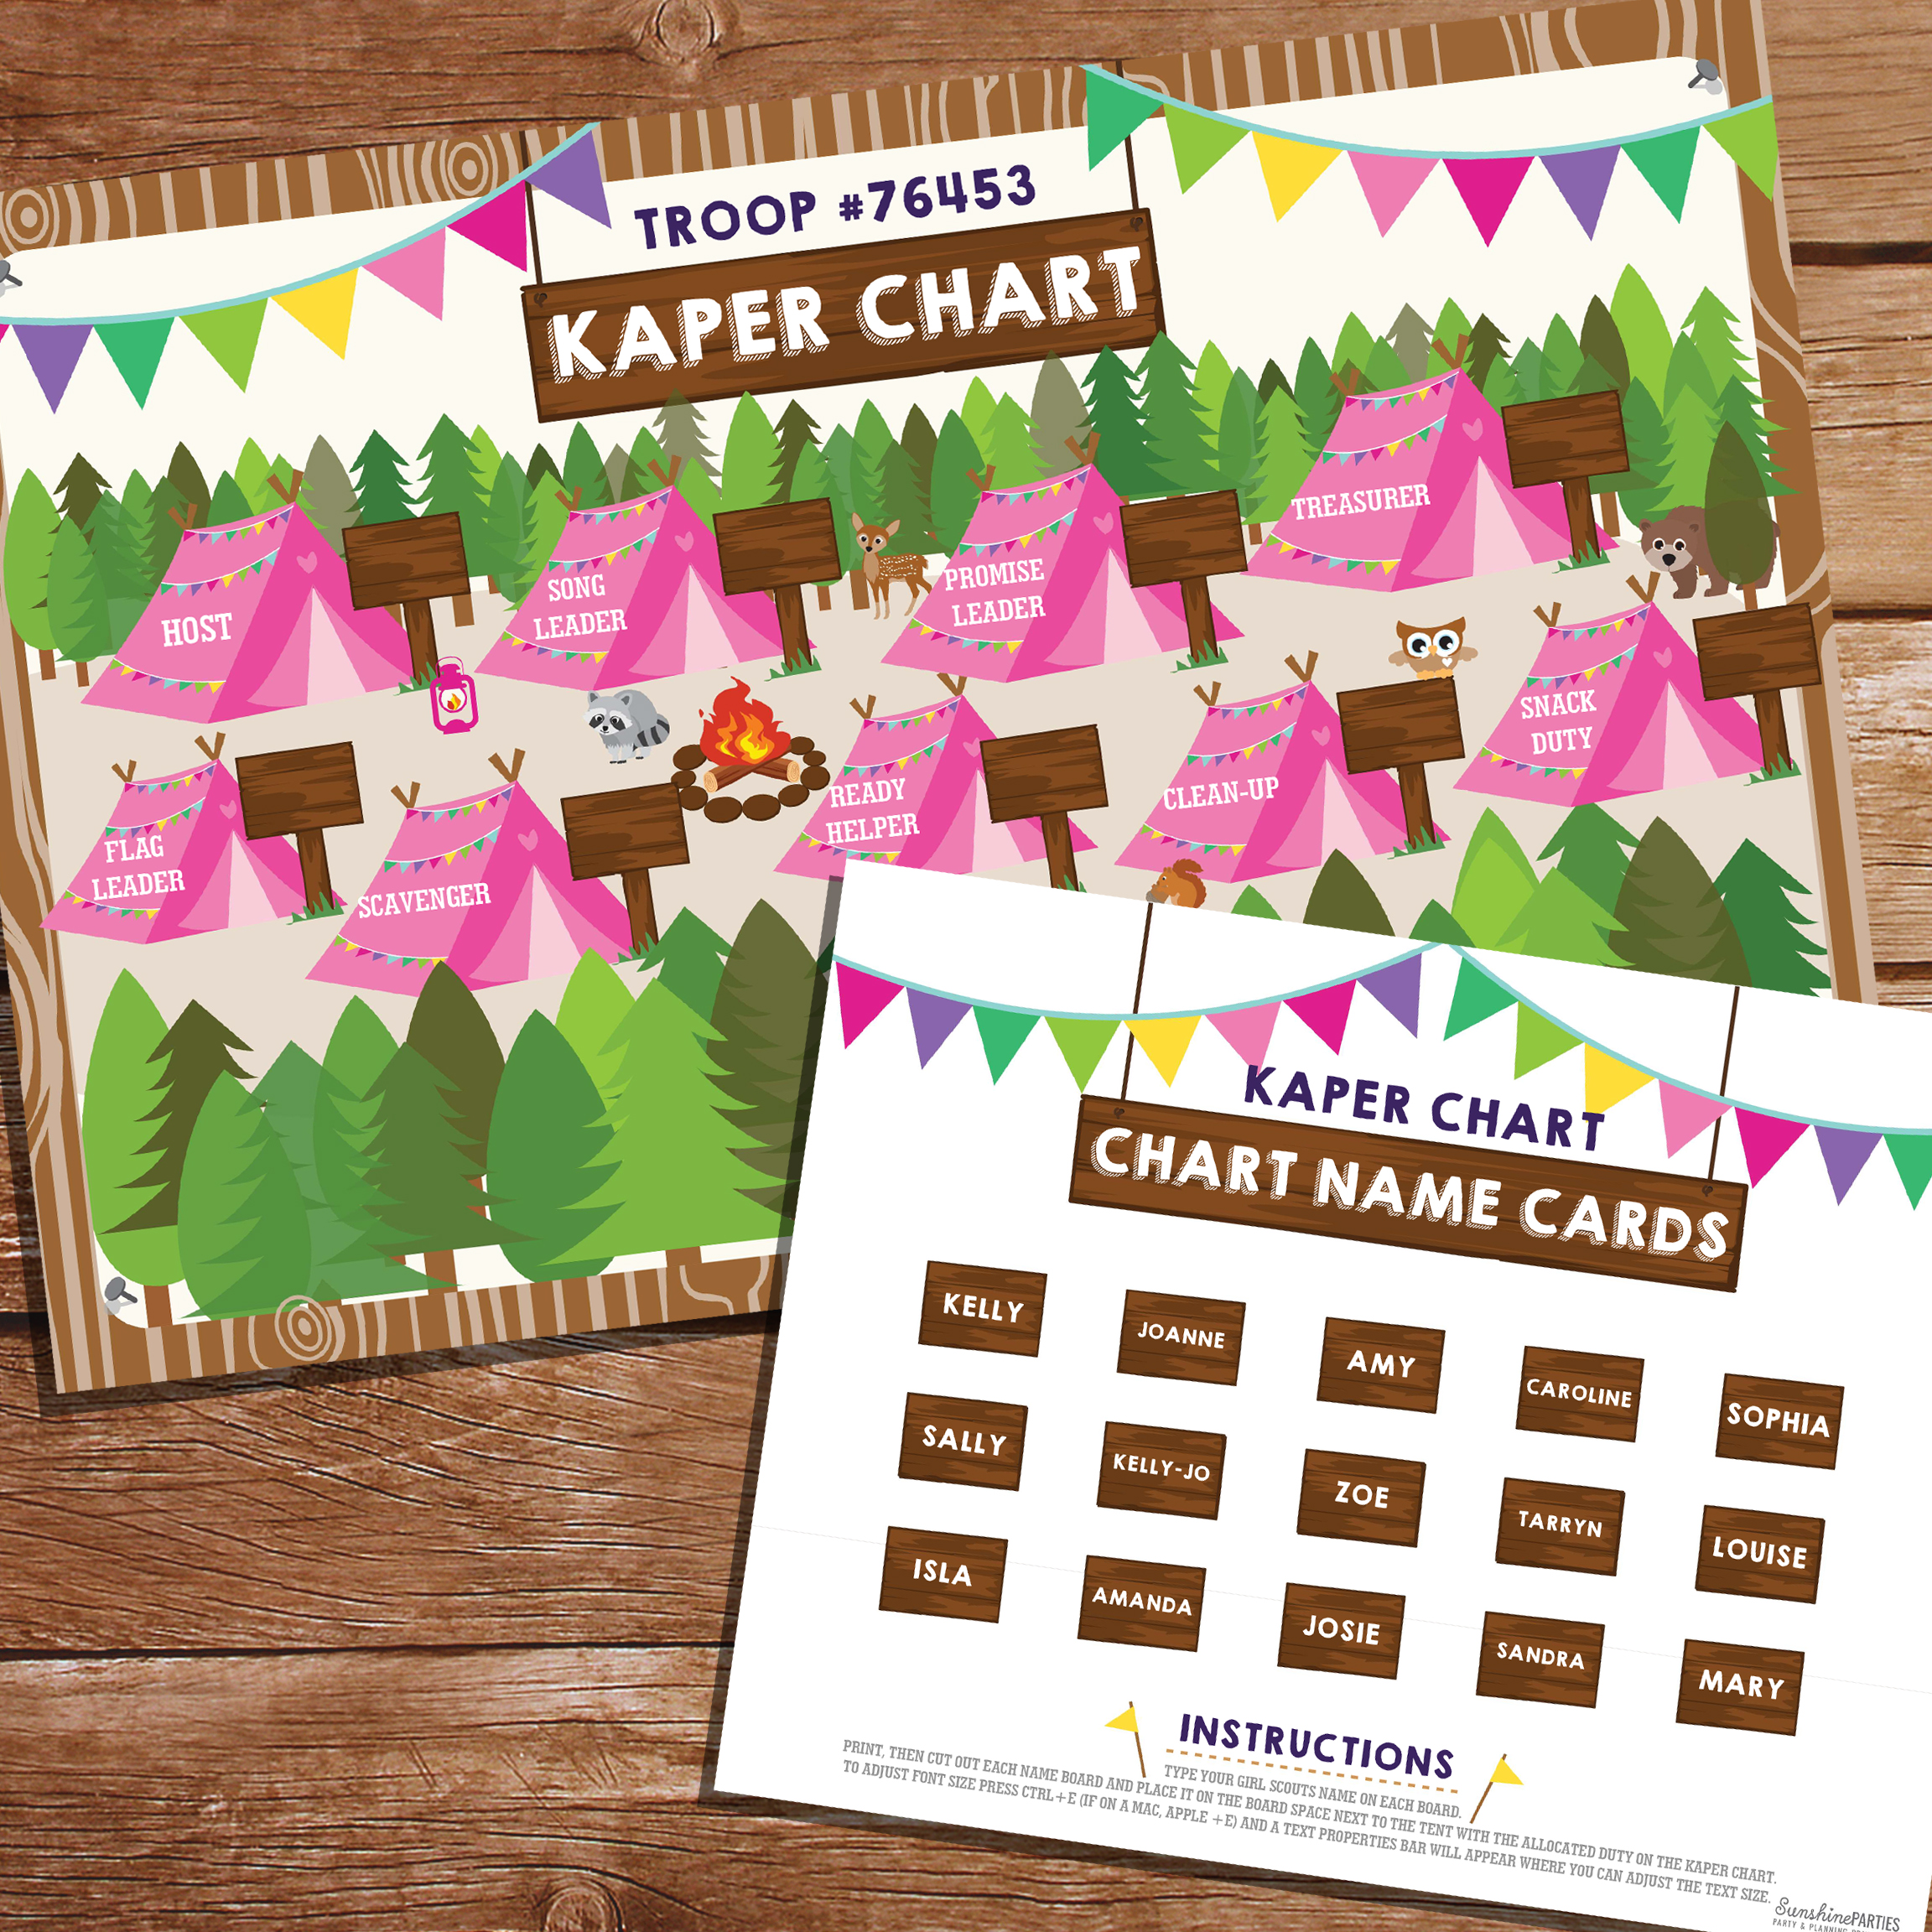 Get your girl scout or brownies kaper chart and name cards - editable and printable! 